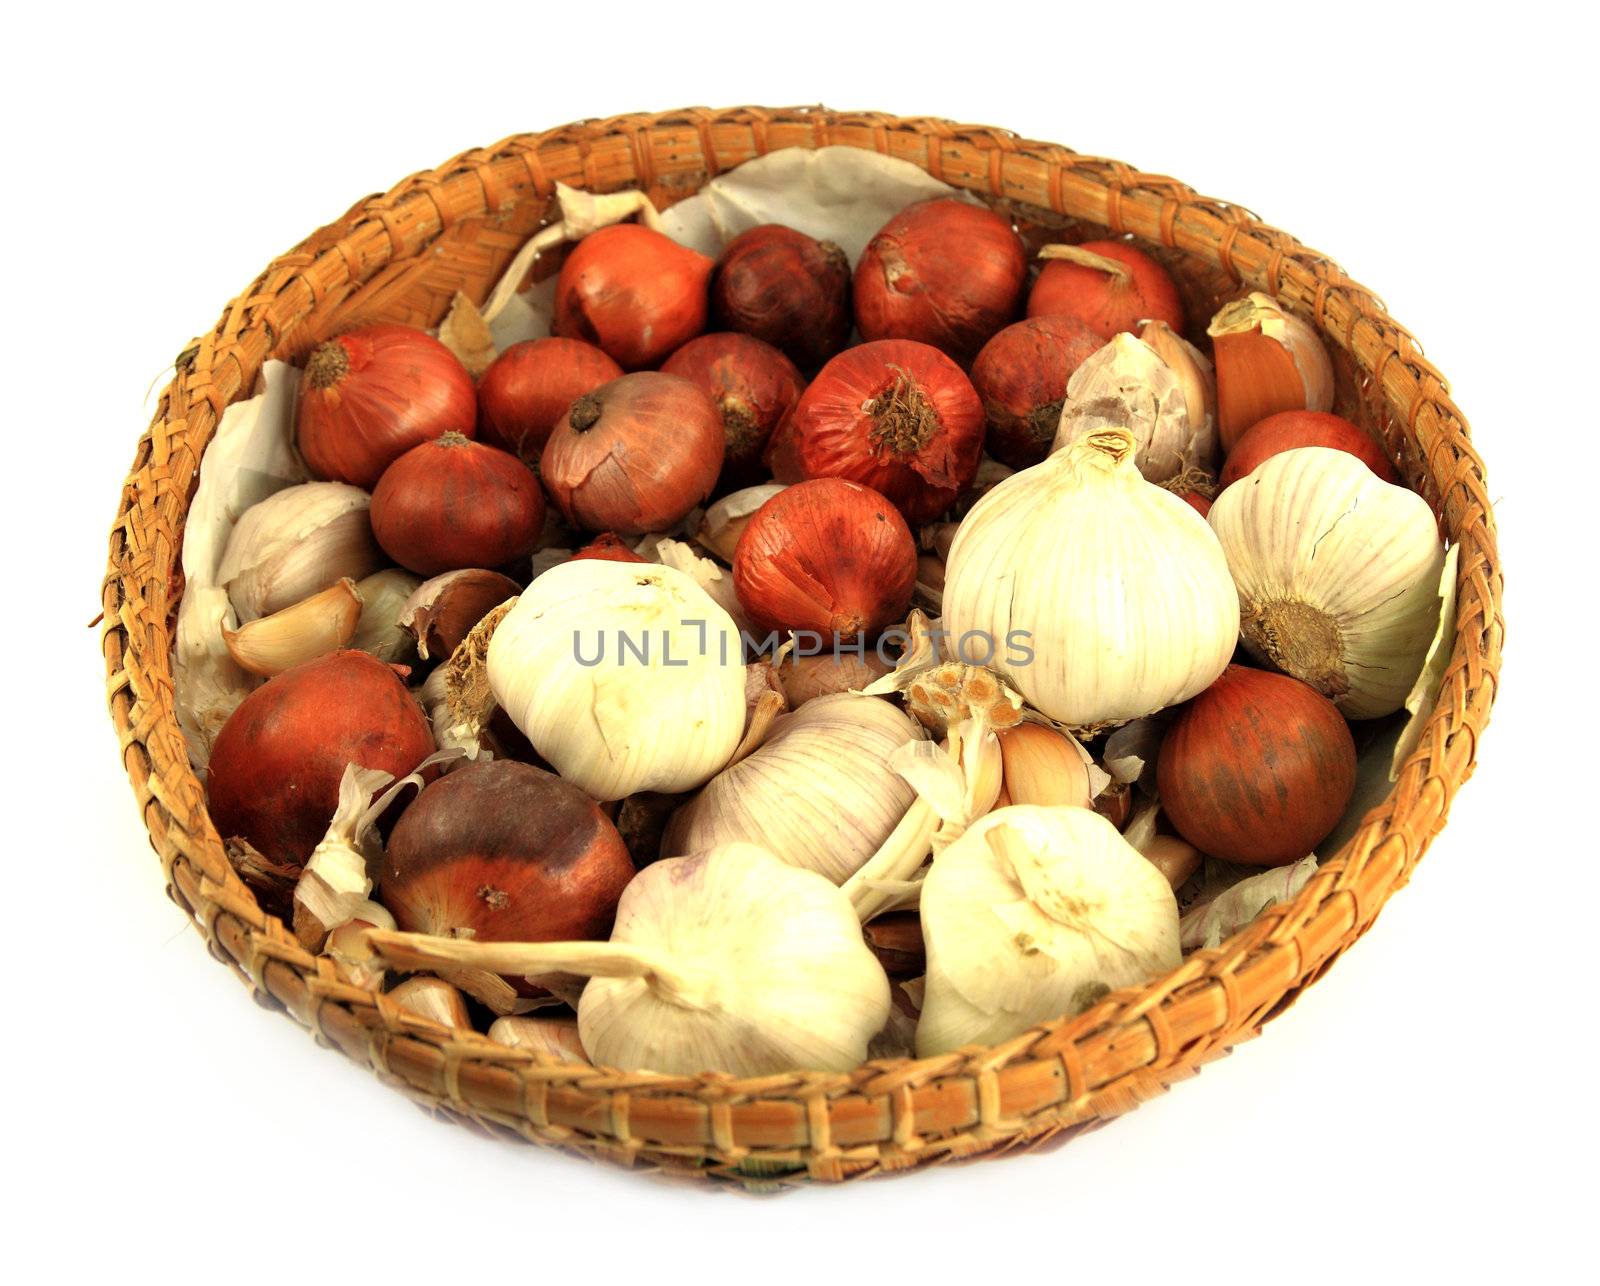 onion and garlic on white background